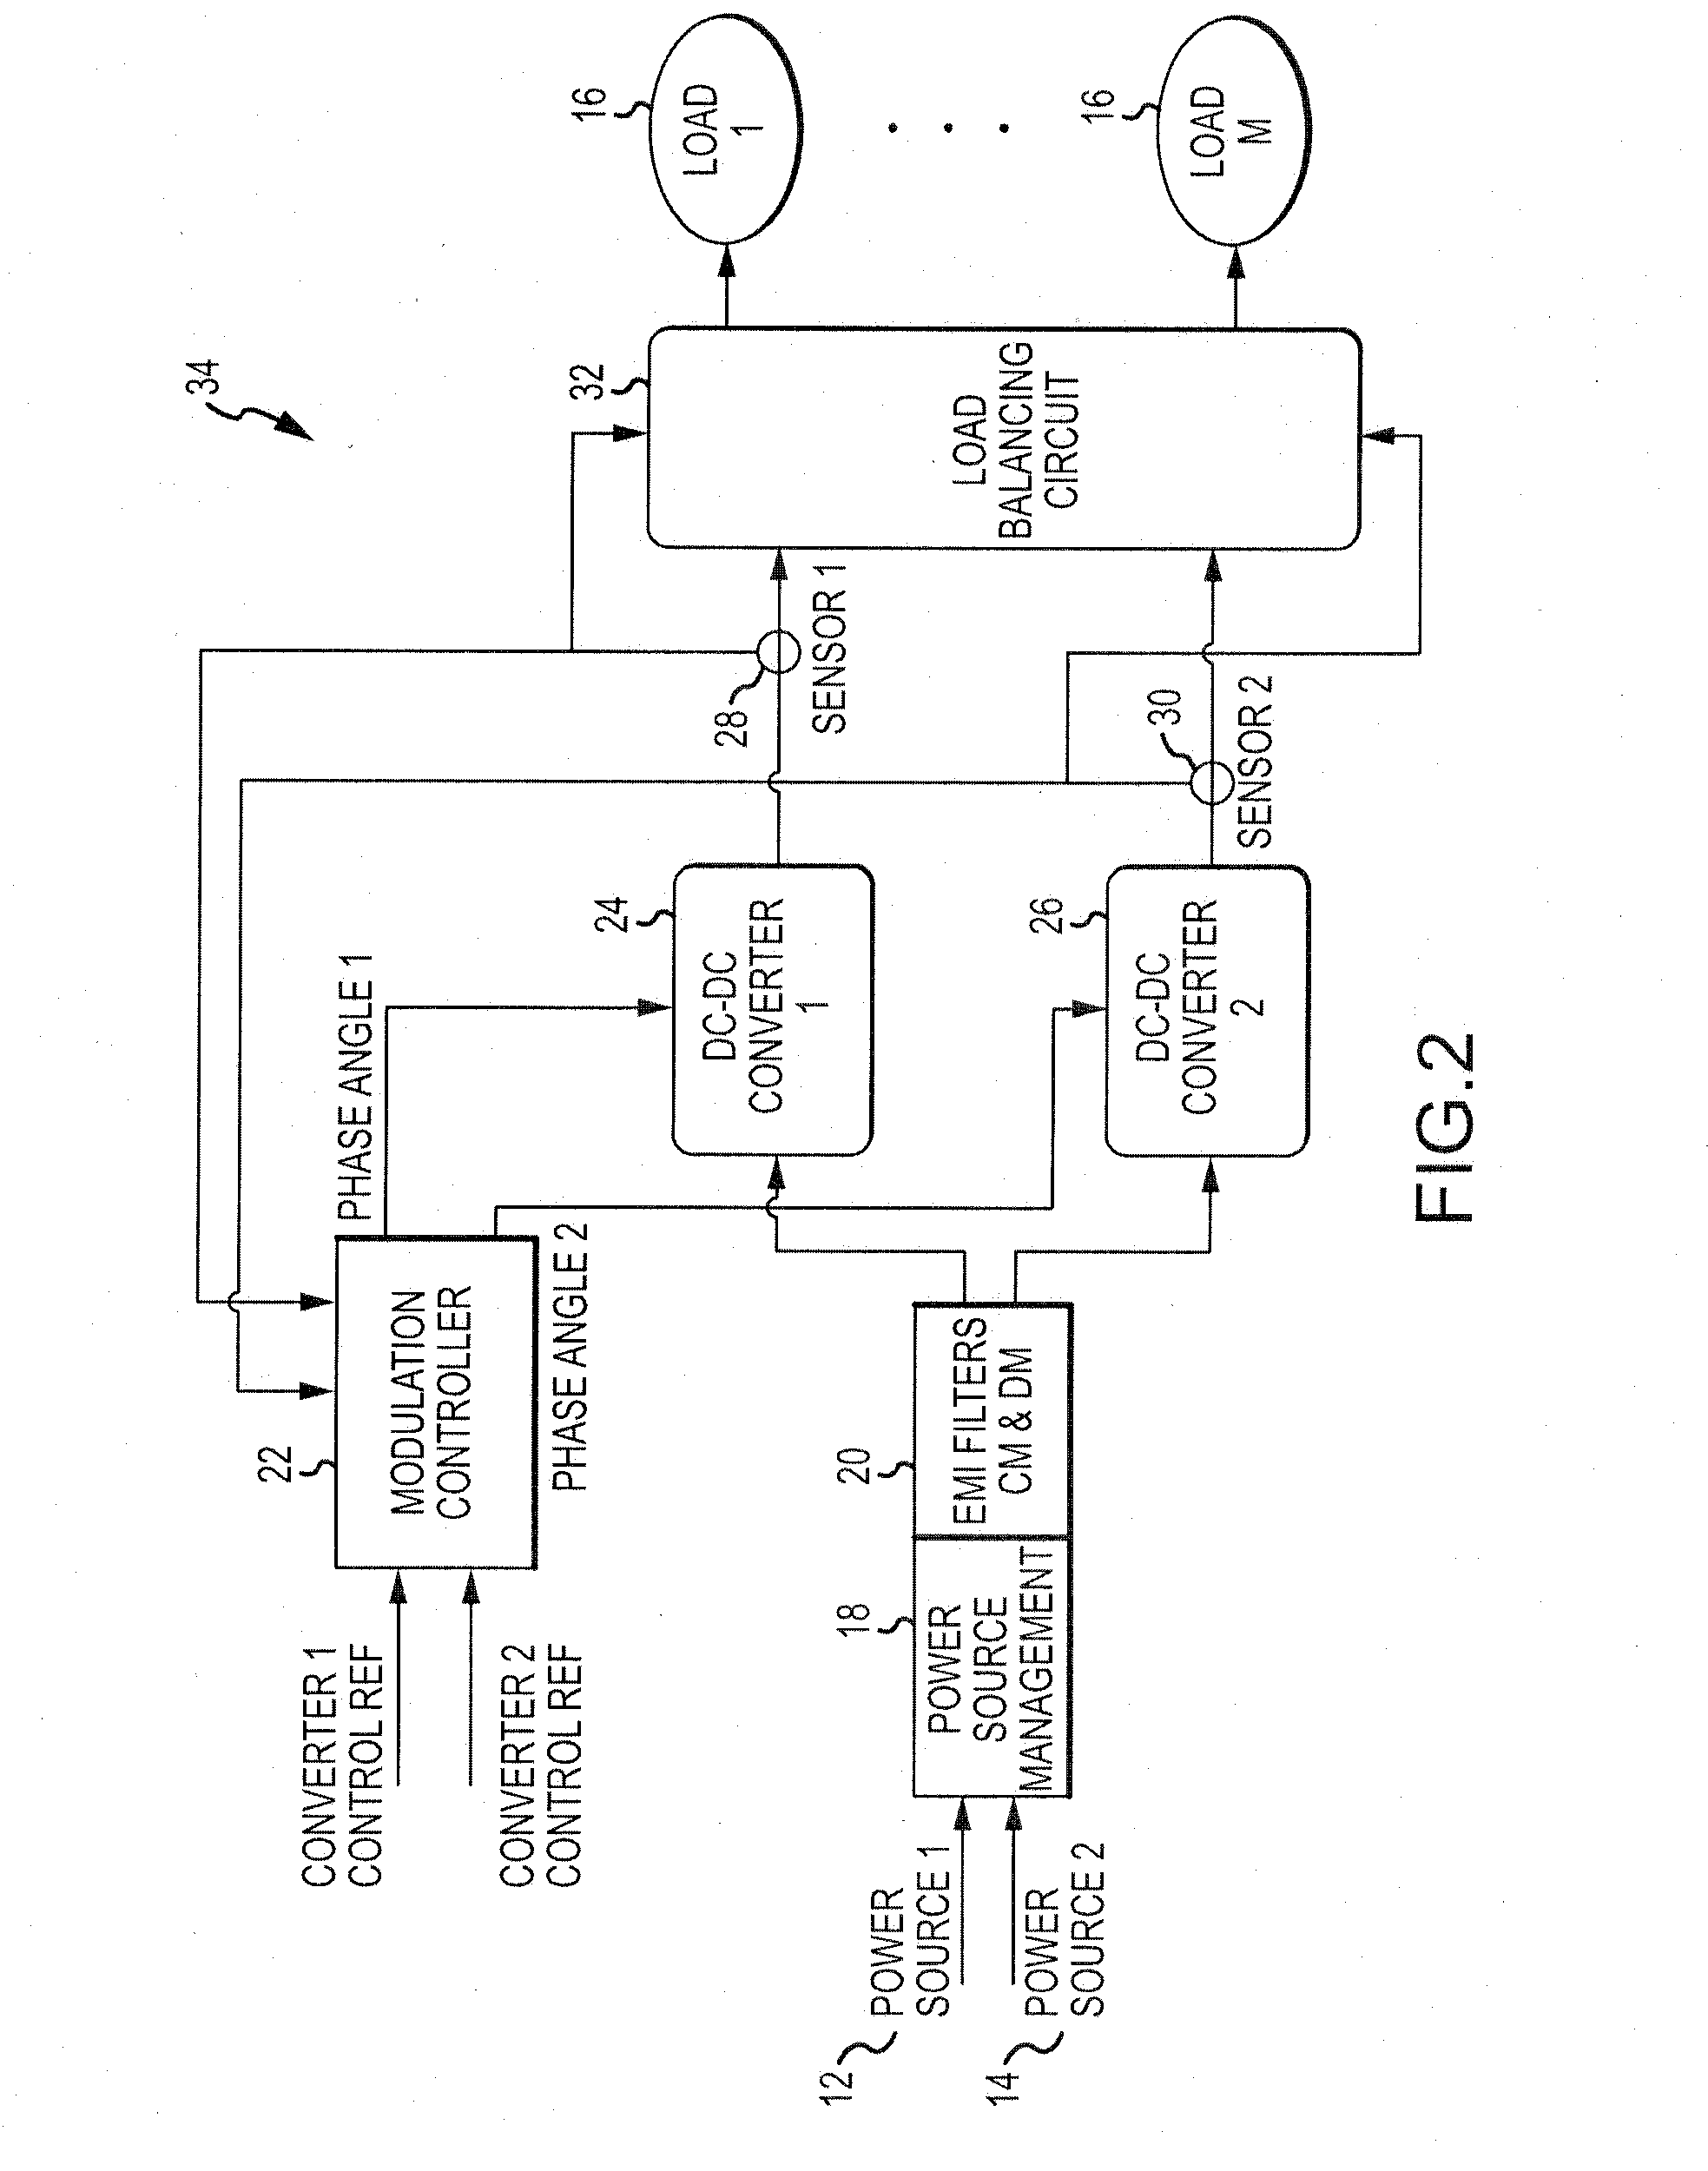 Load balanced split-phase modulation and harmonic control of dc-dc converter pair/column for reduced EMI and smaller EMI filters